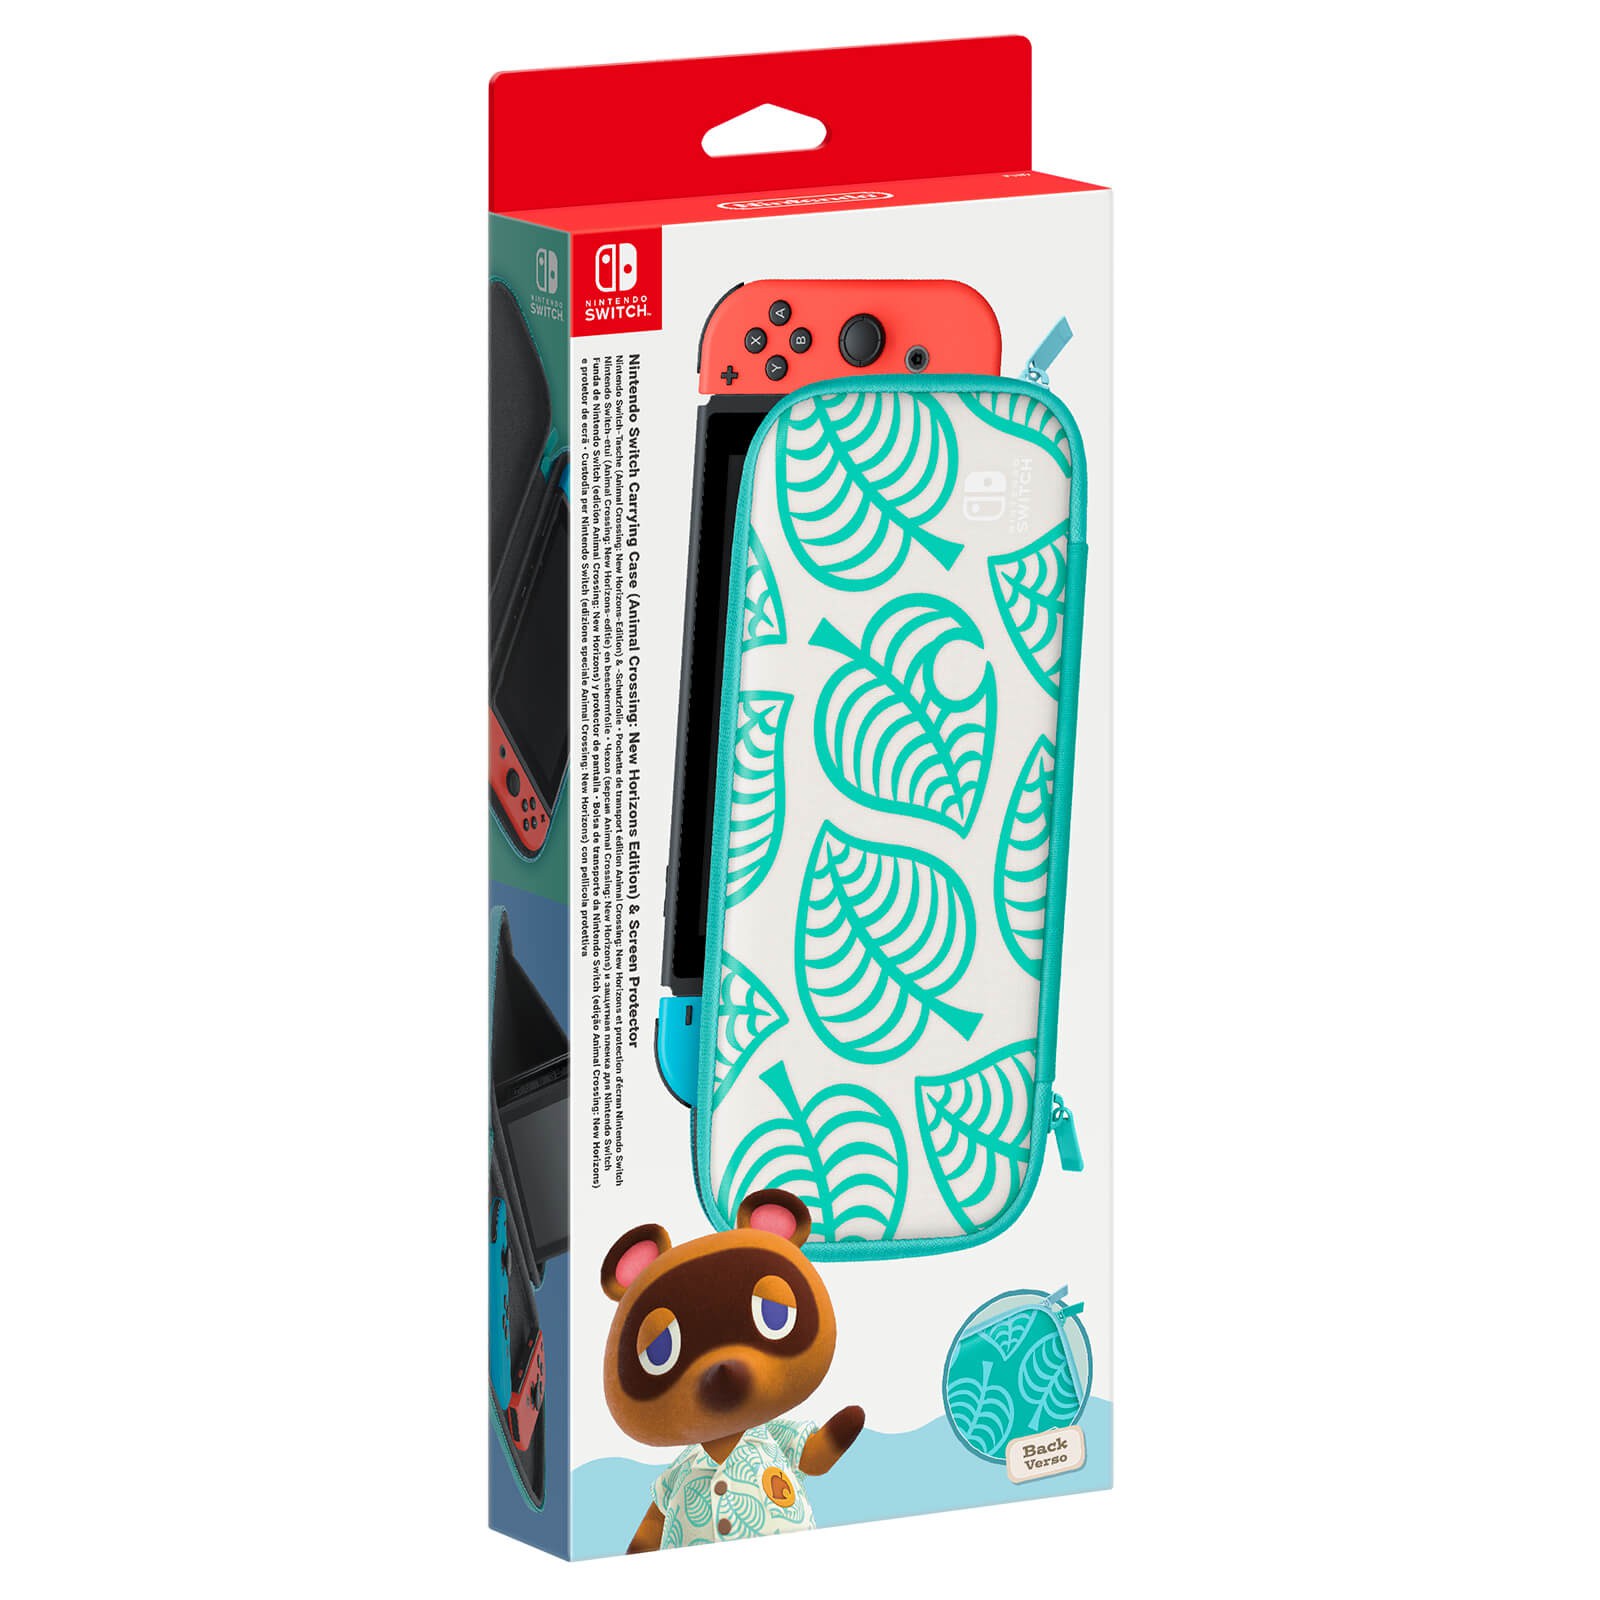 Nintendo Switch Animal Crossing: New Horizons Carrying Case & Screen Protector